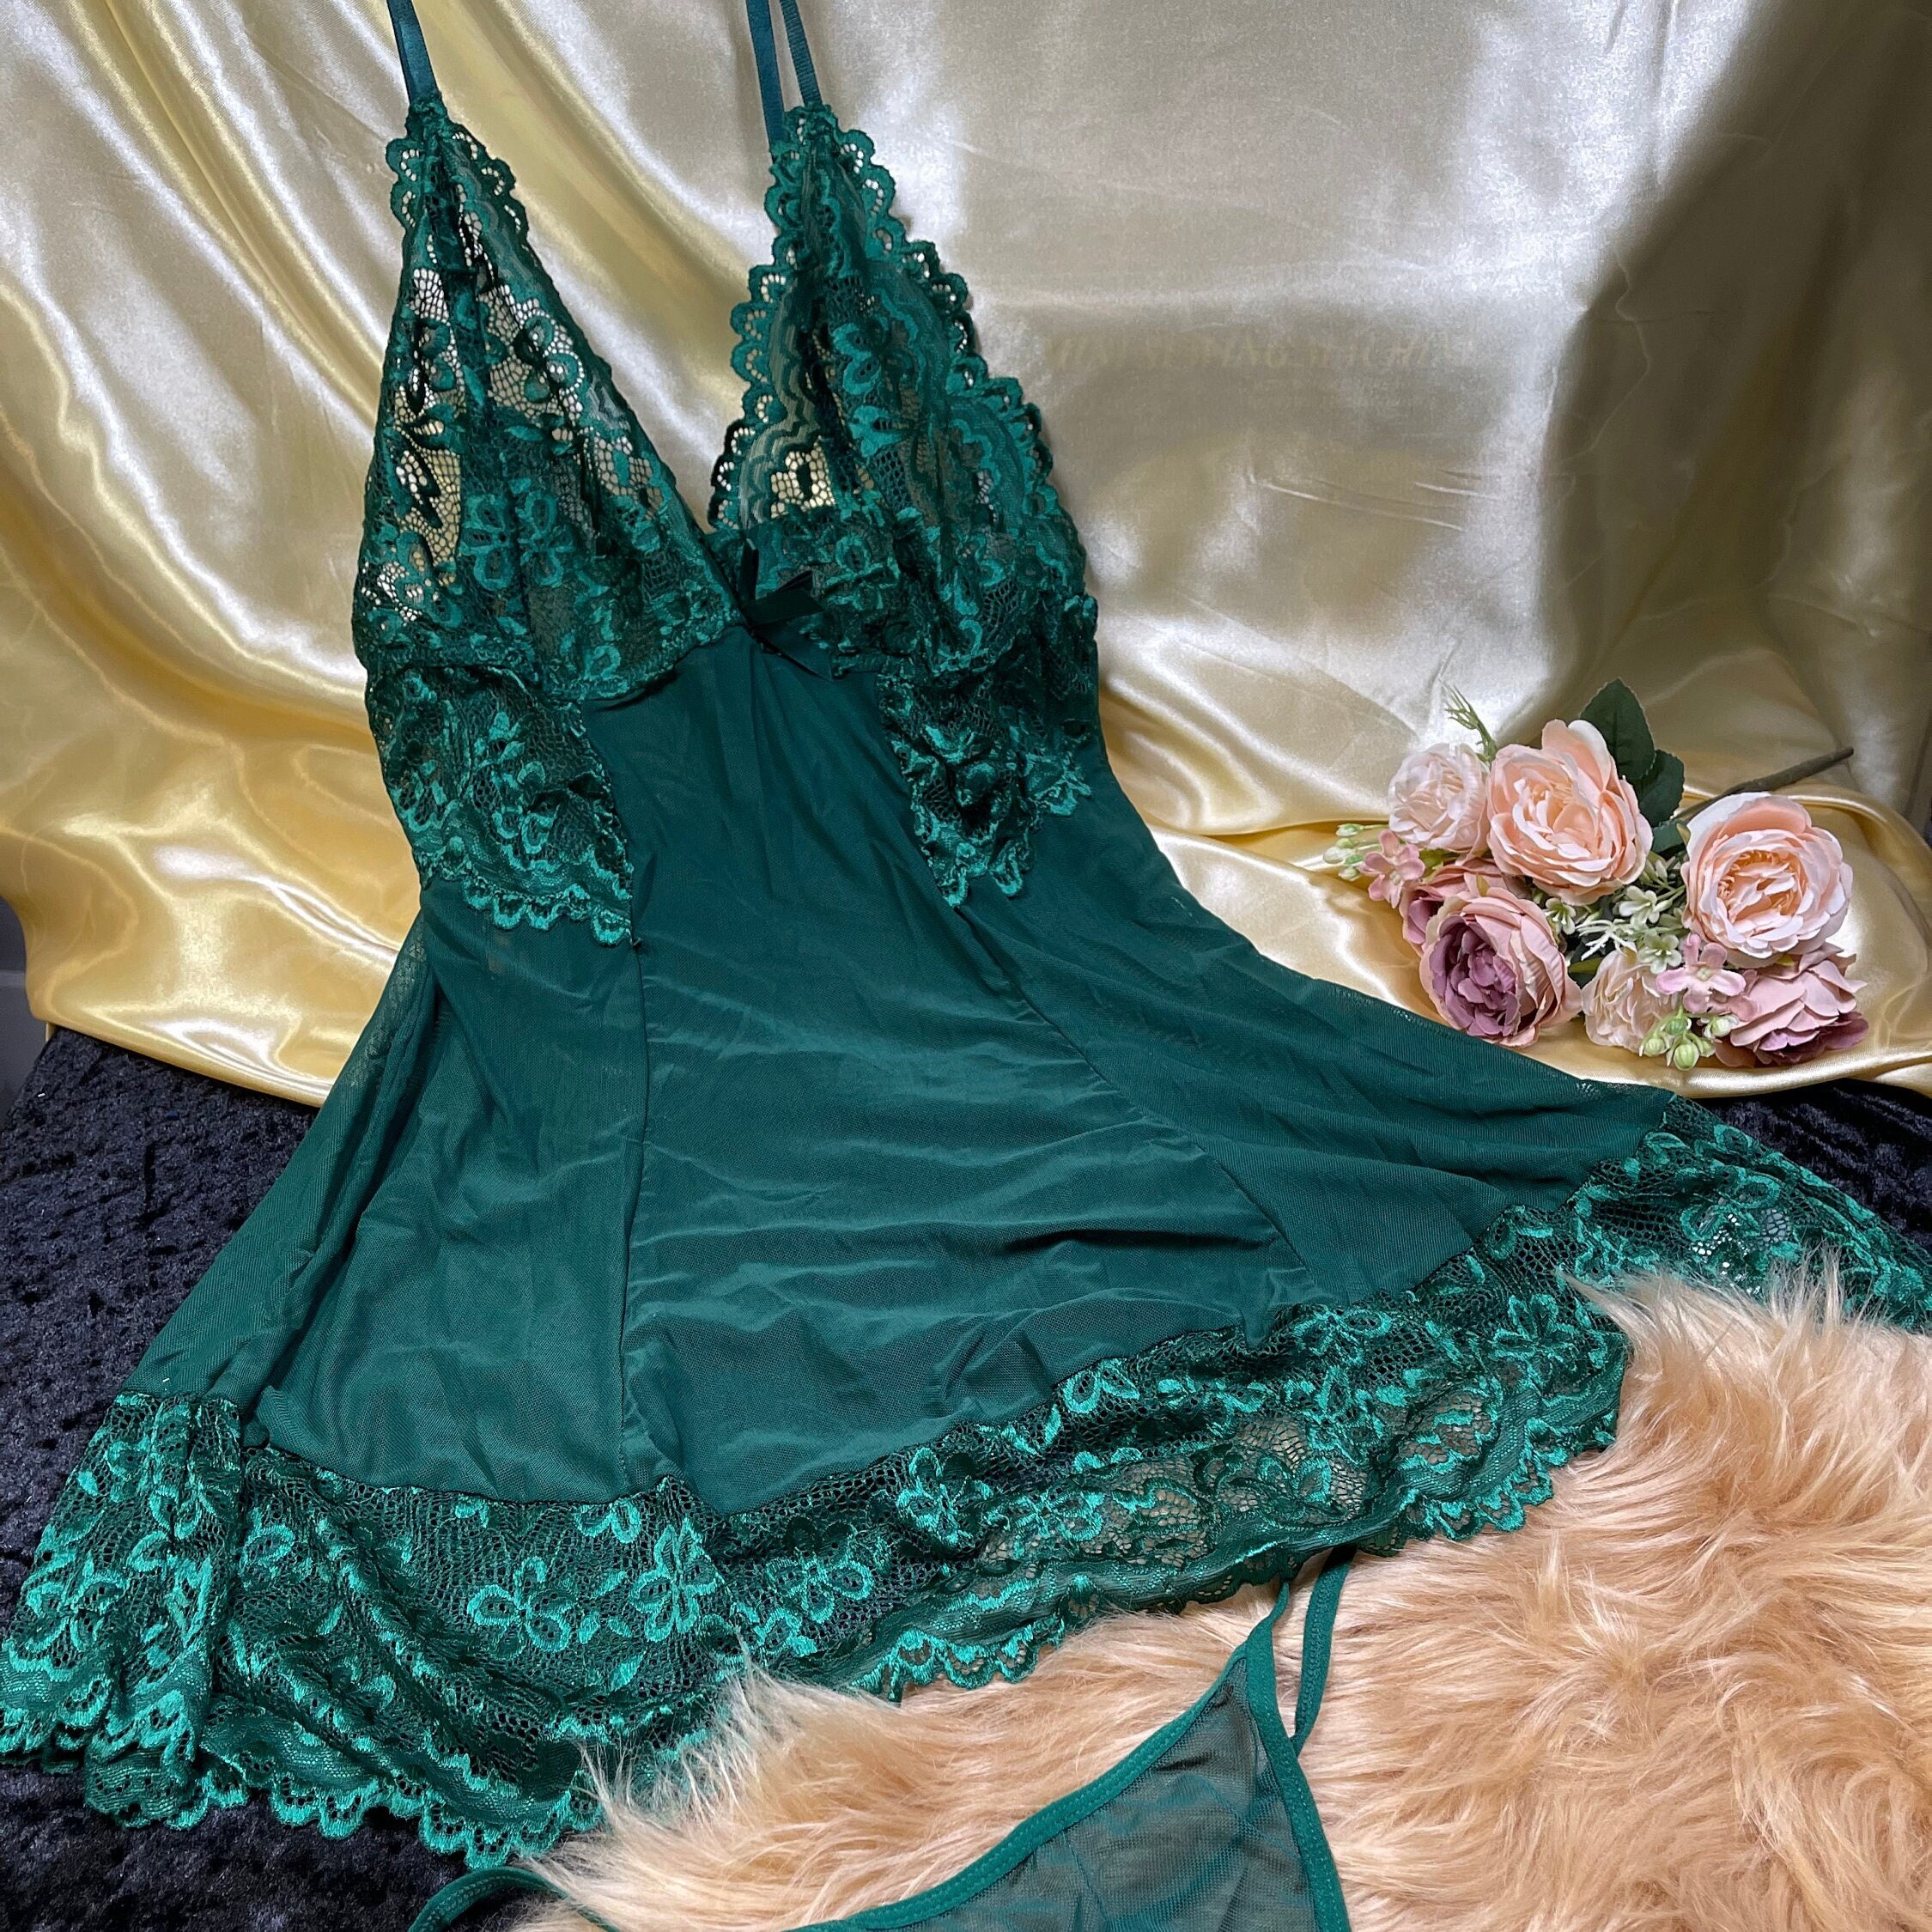 Emerald Green Pure Silk and Lace Luxury Lingerie Set -  Canada